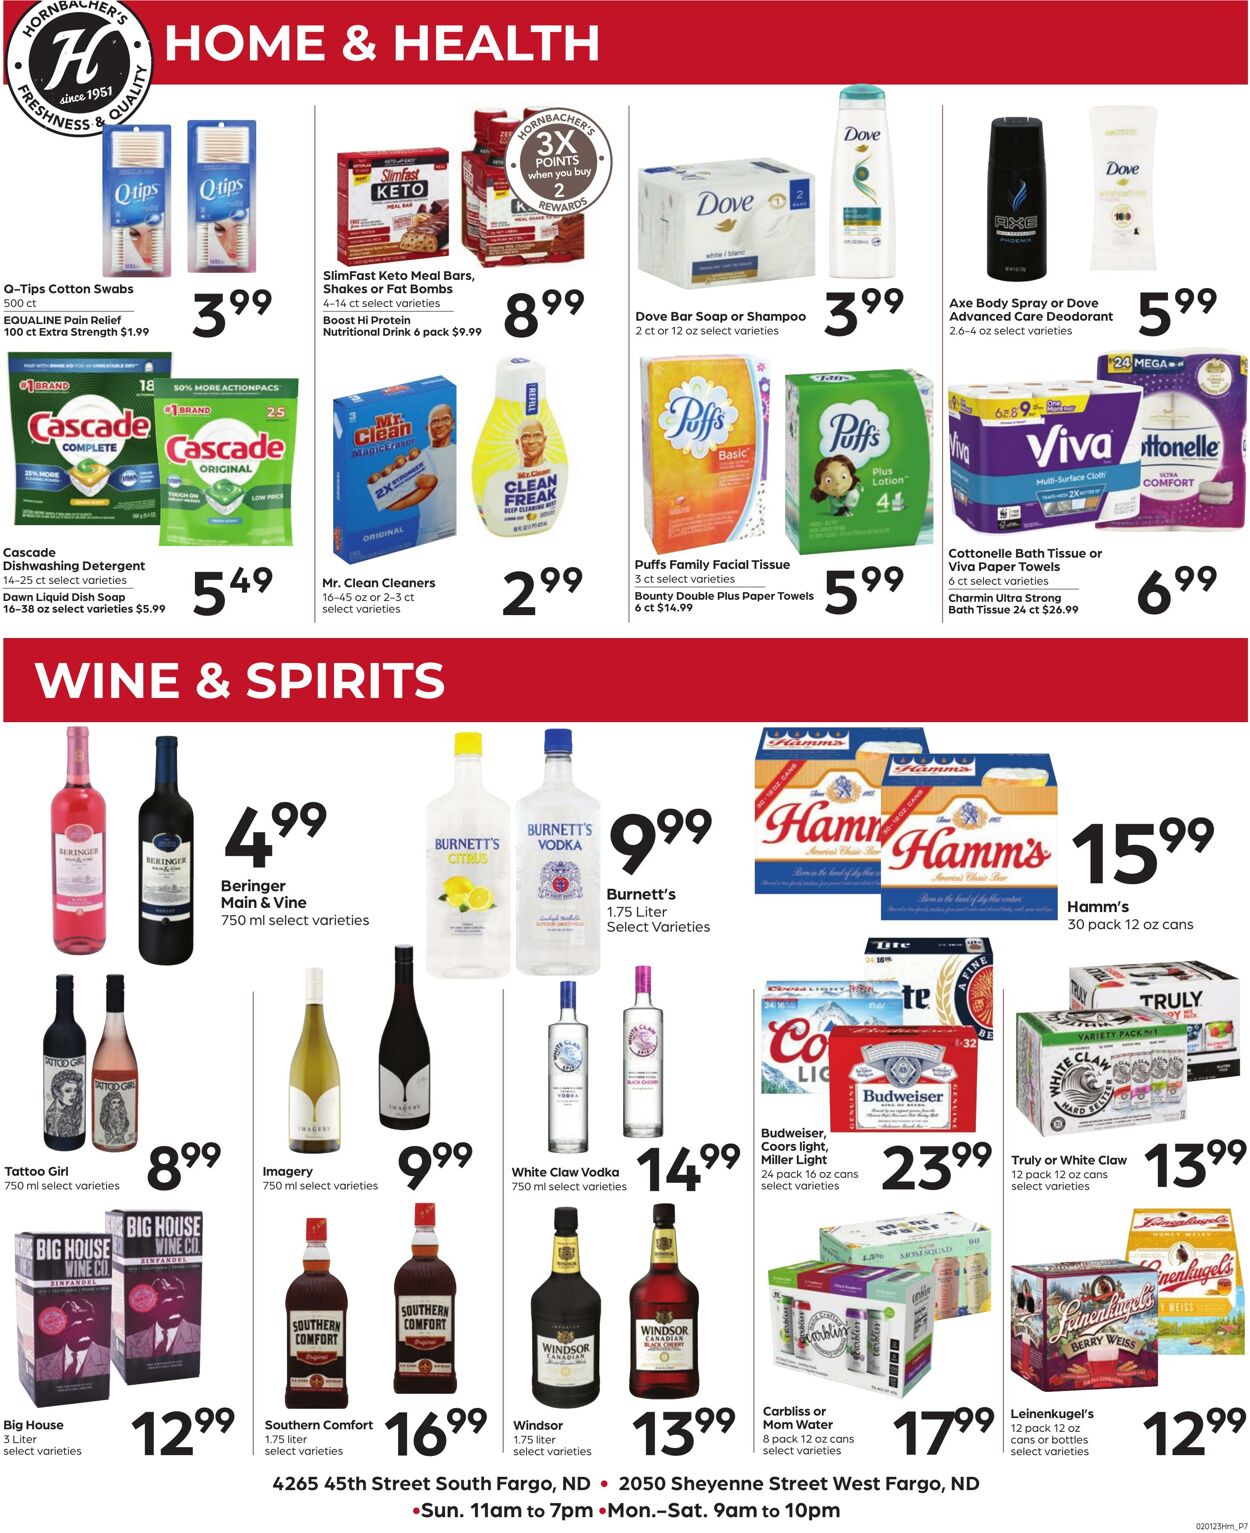 Weekly ad Hornbacher's 02/01/2023 - 02/07/2023